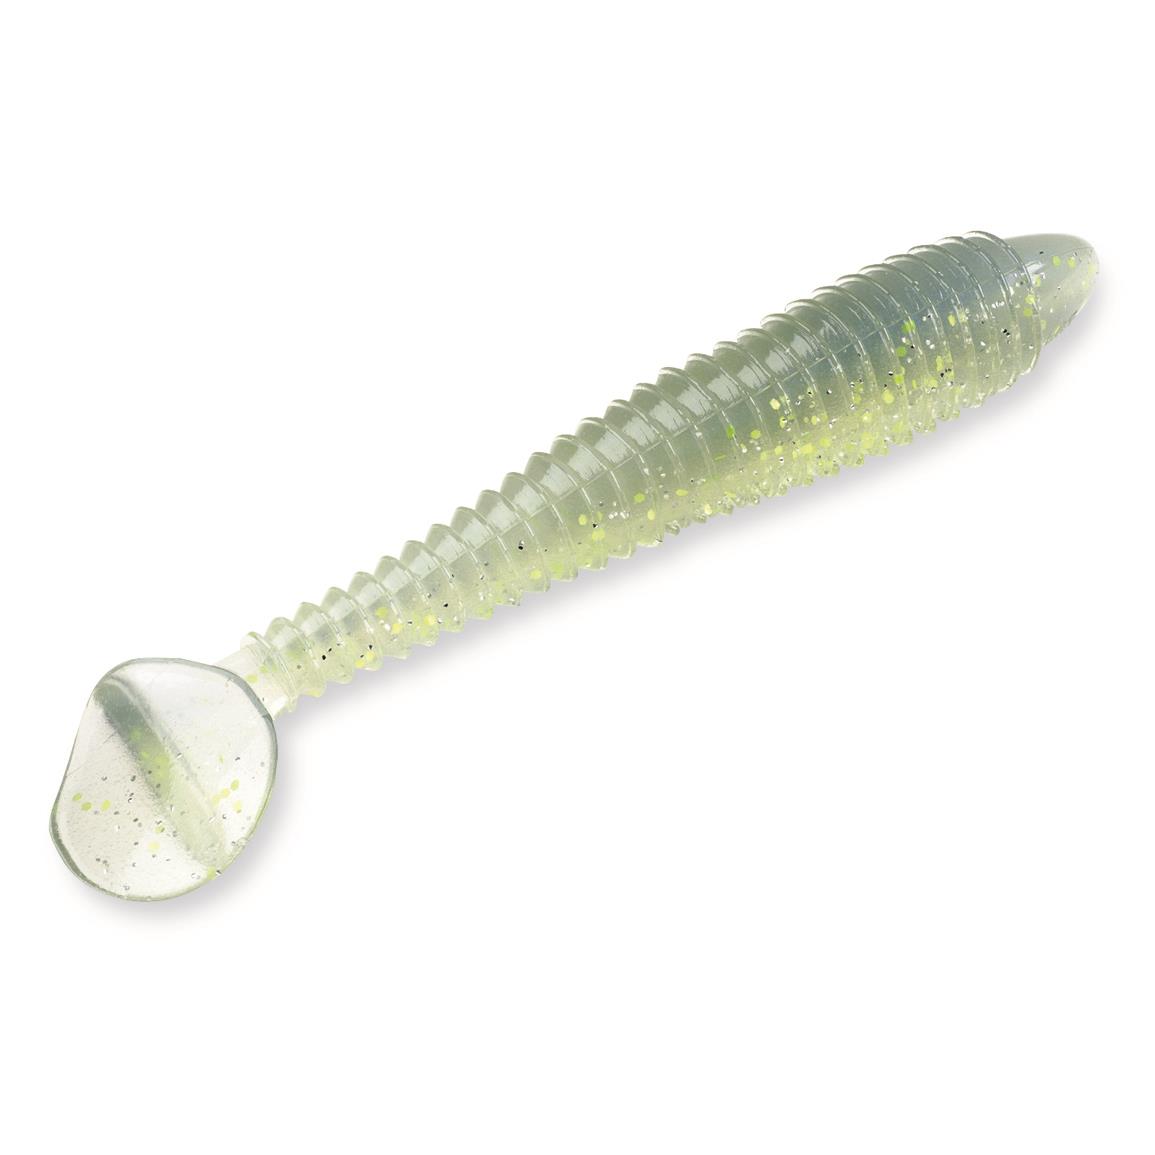 Strike King Rage Swimmer, 7 Pack, Sexy Shad